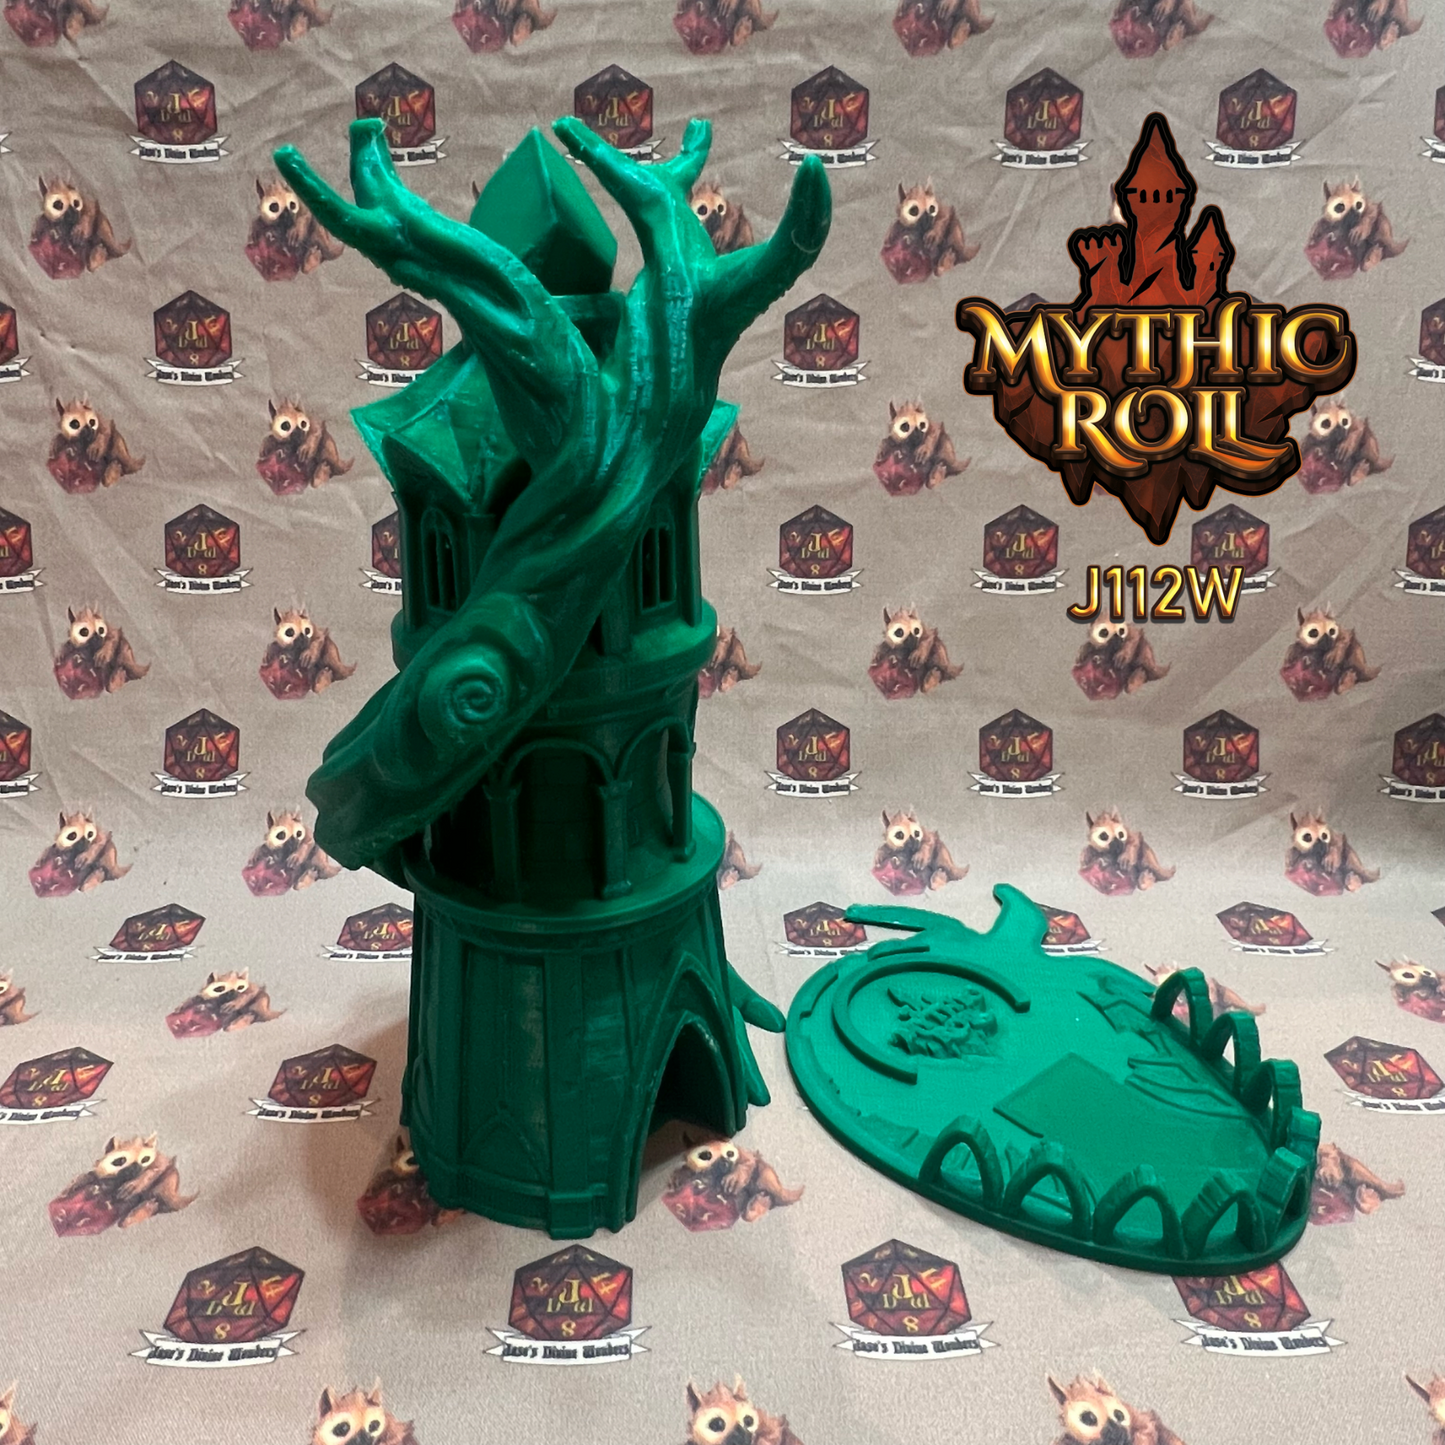 Mythic Roll Dice Tower - Tree of Life